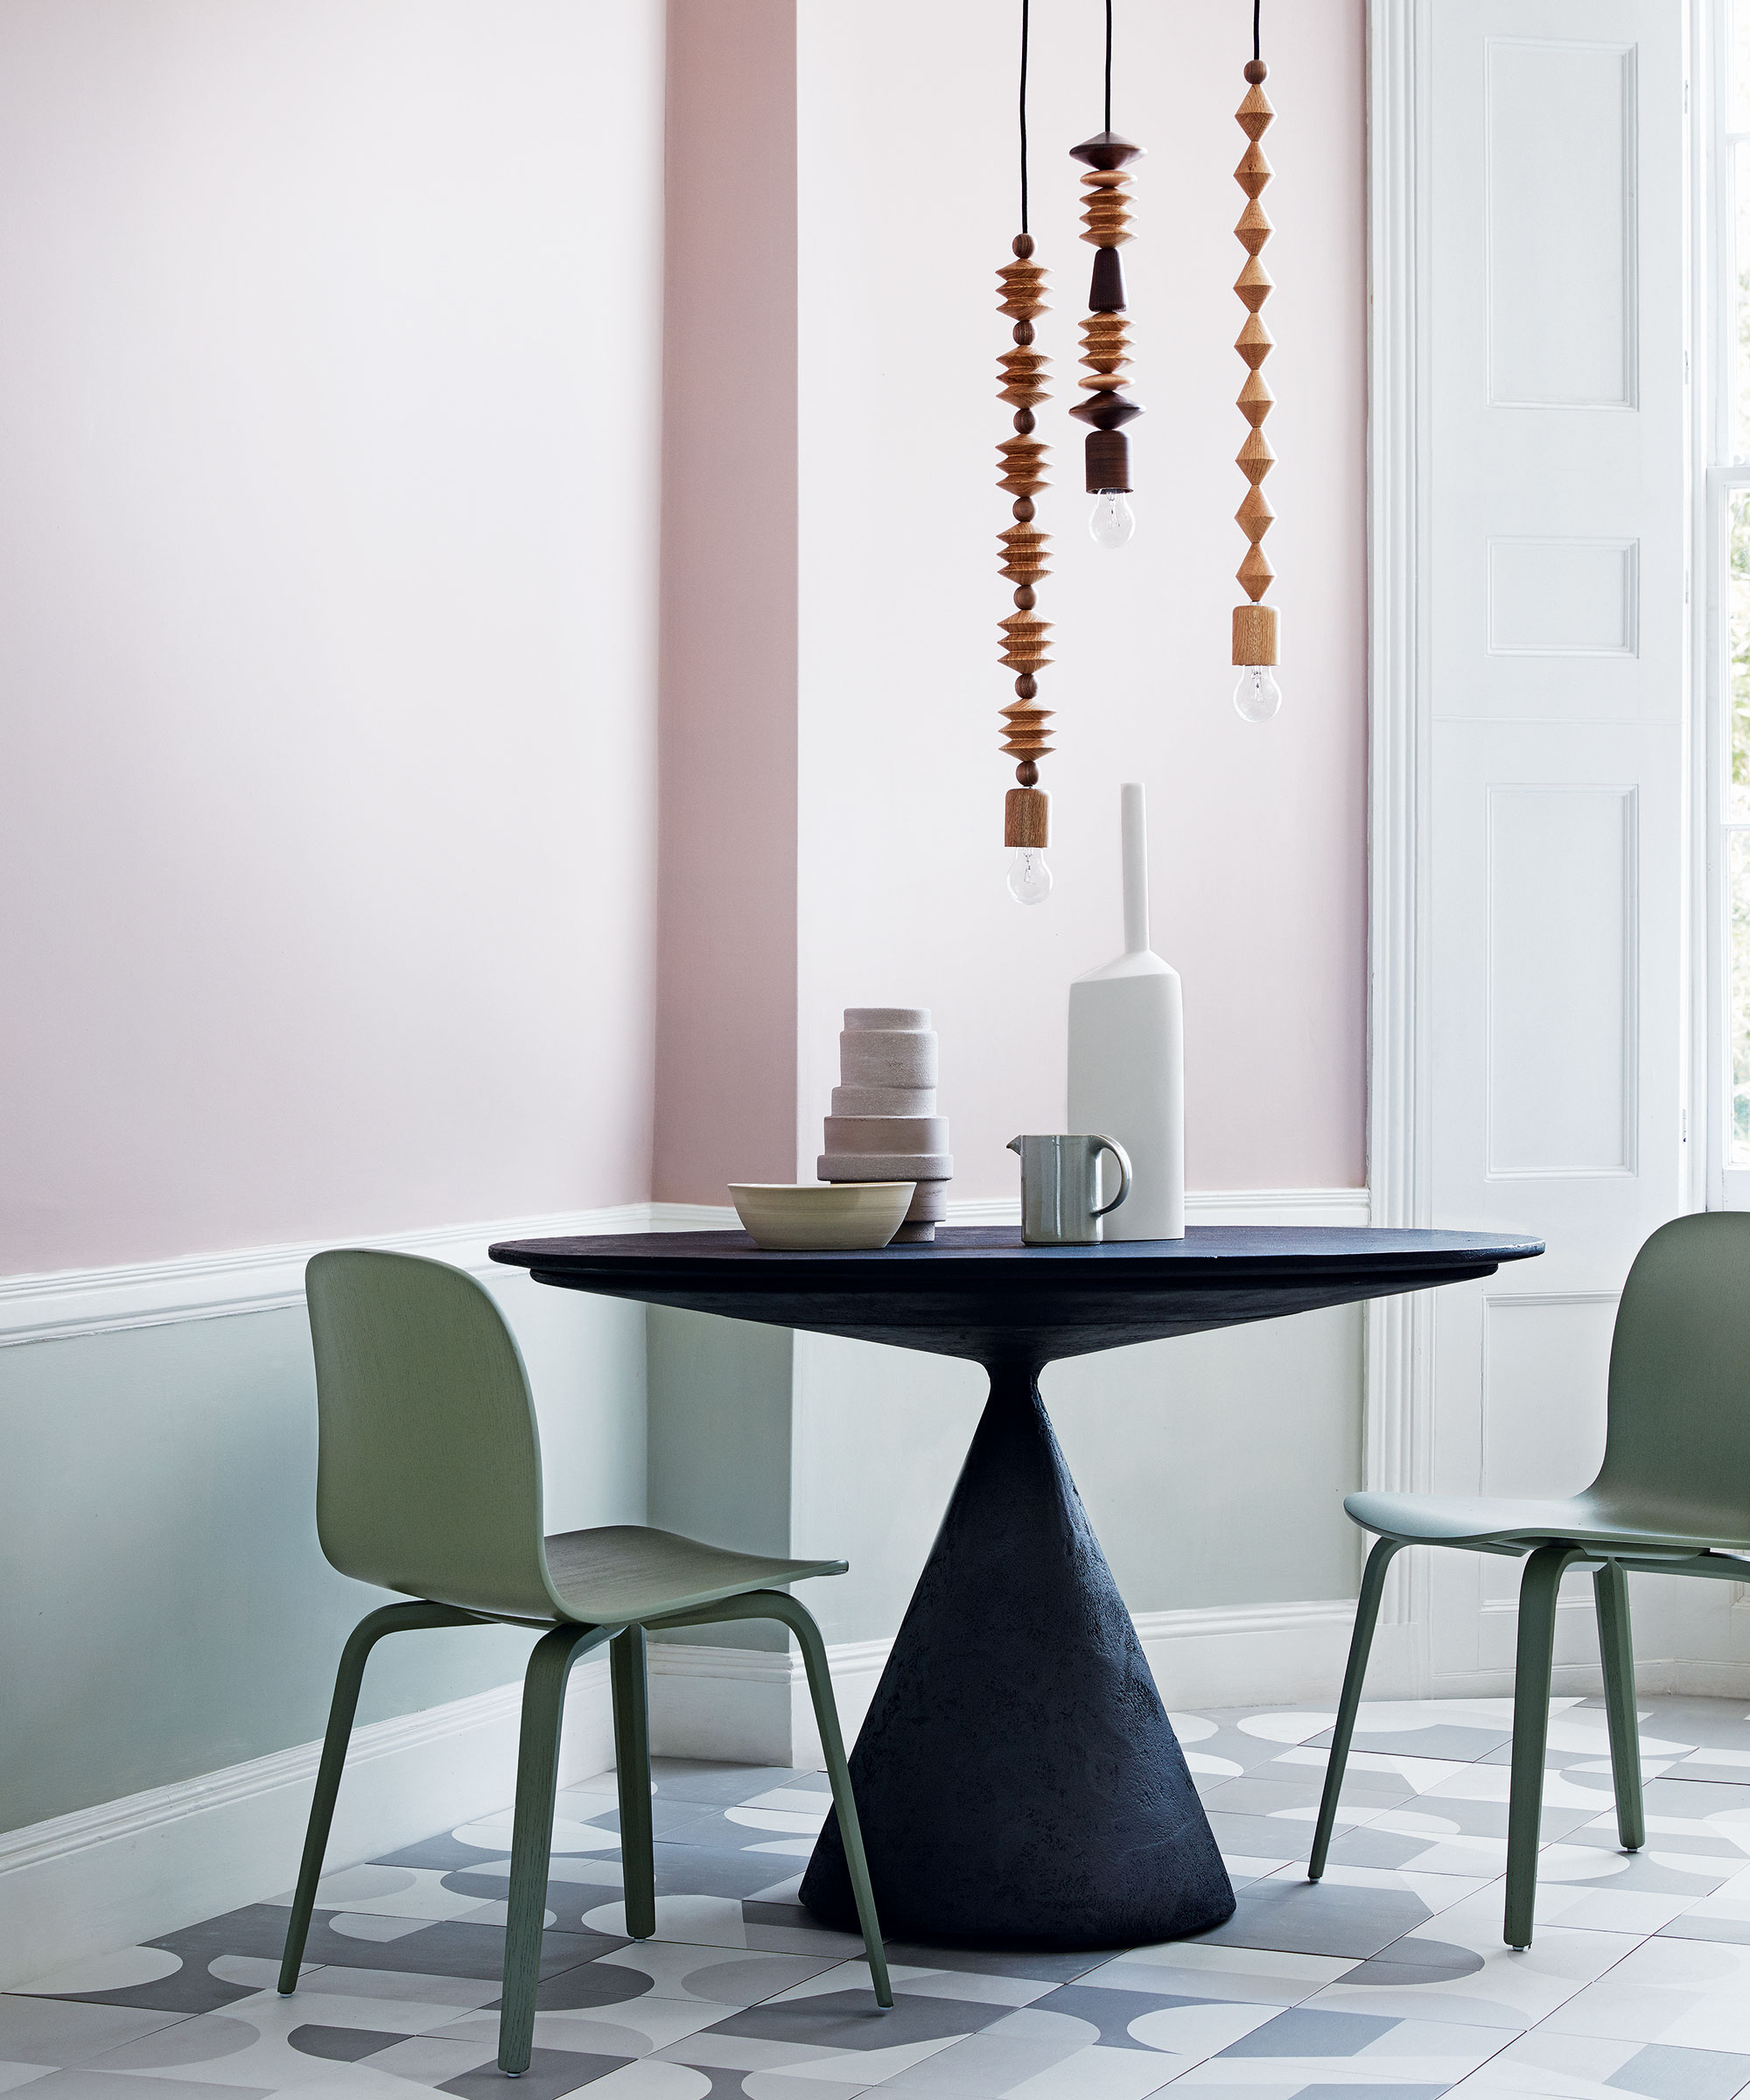 Small dining room ideas with round table and pink walls